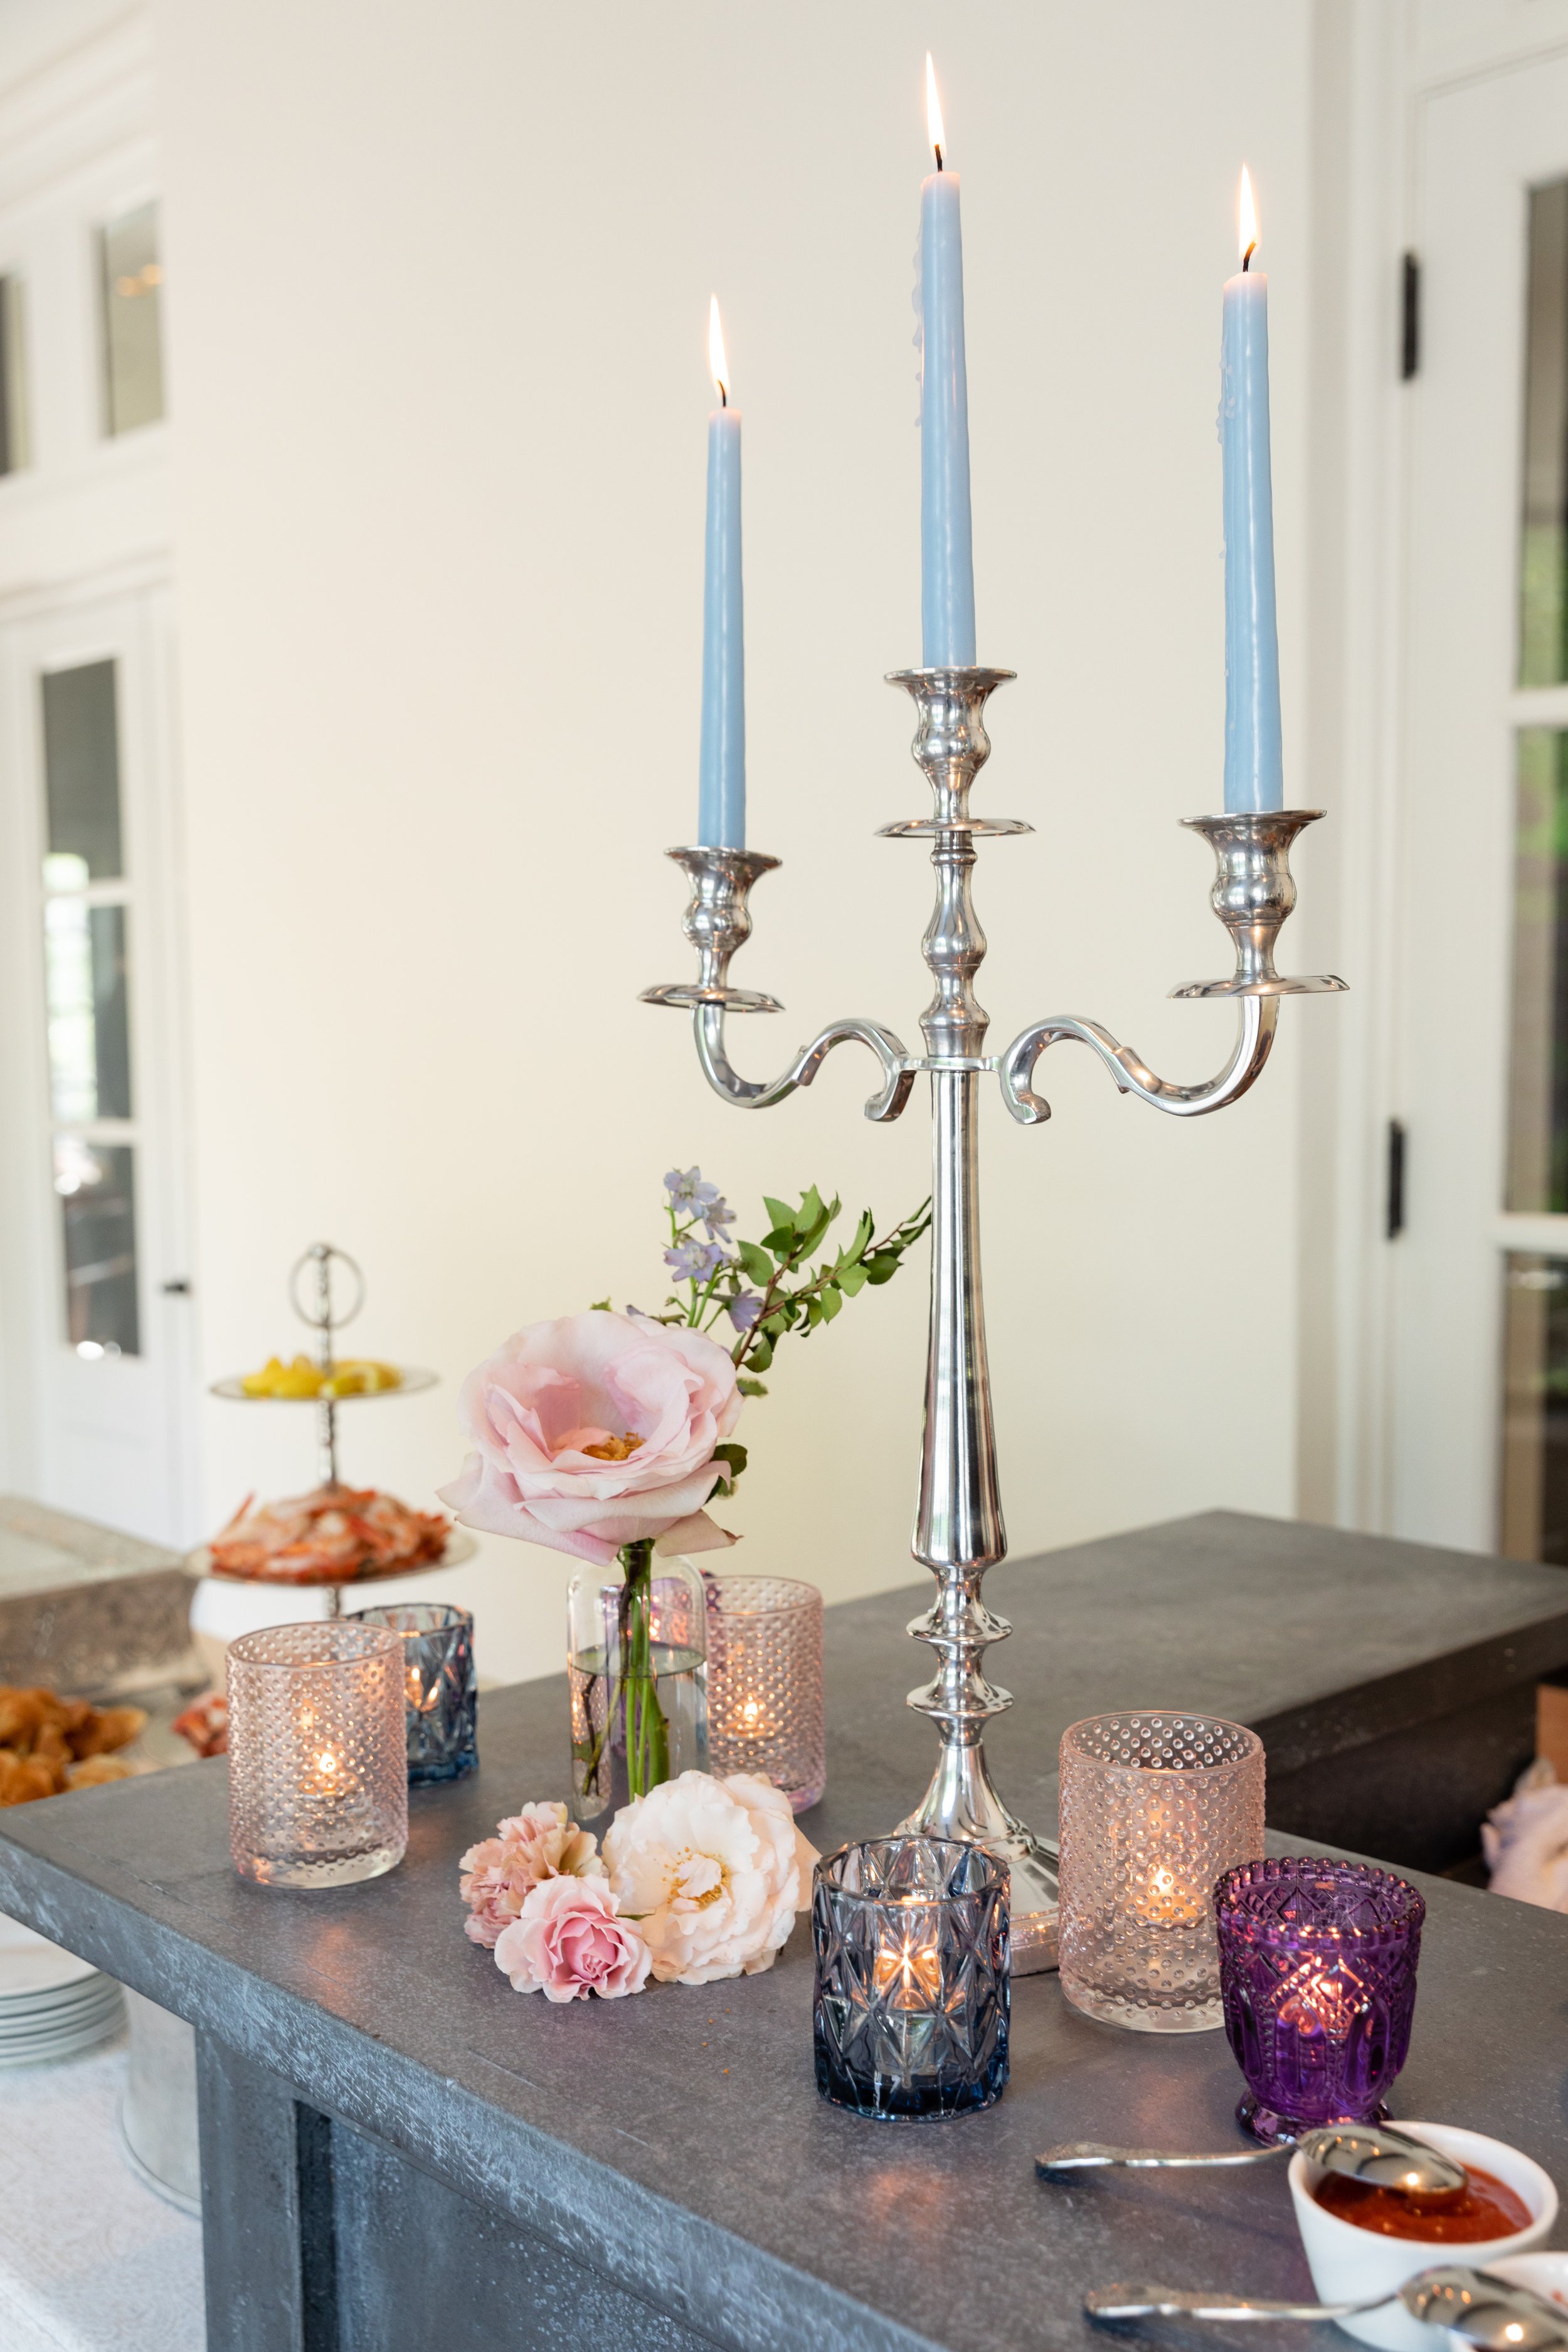 Bridgerton inspired engagement party at a private home in Nashville, TN with organic florals of wisteria, spanish moss & pastel blooms. Silver candelabra with light blue tapers and styled flowers. Nashville wedding floral designer, Rosemary & Finch.